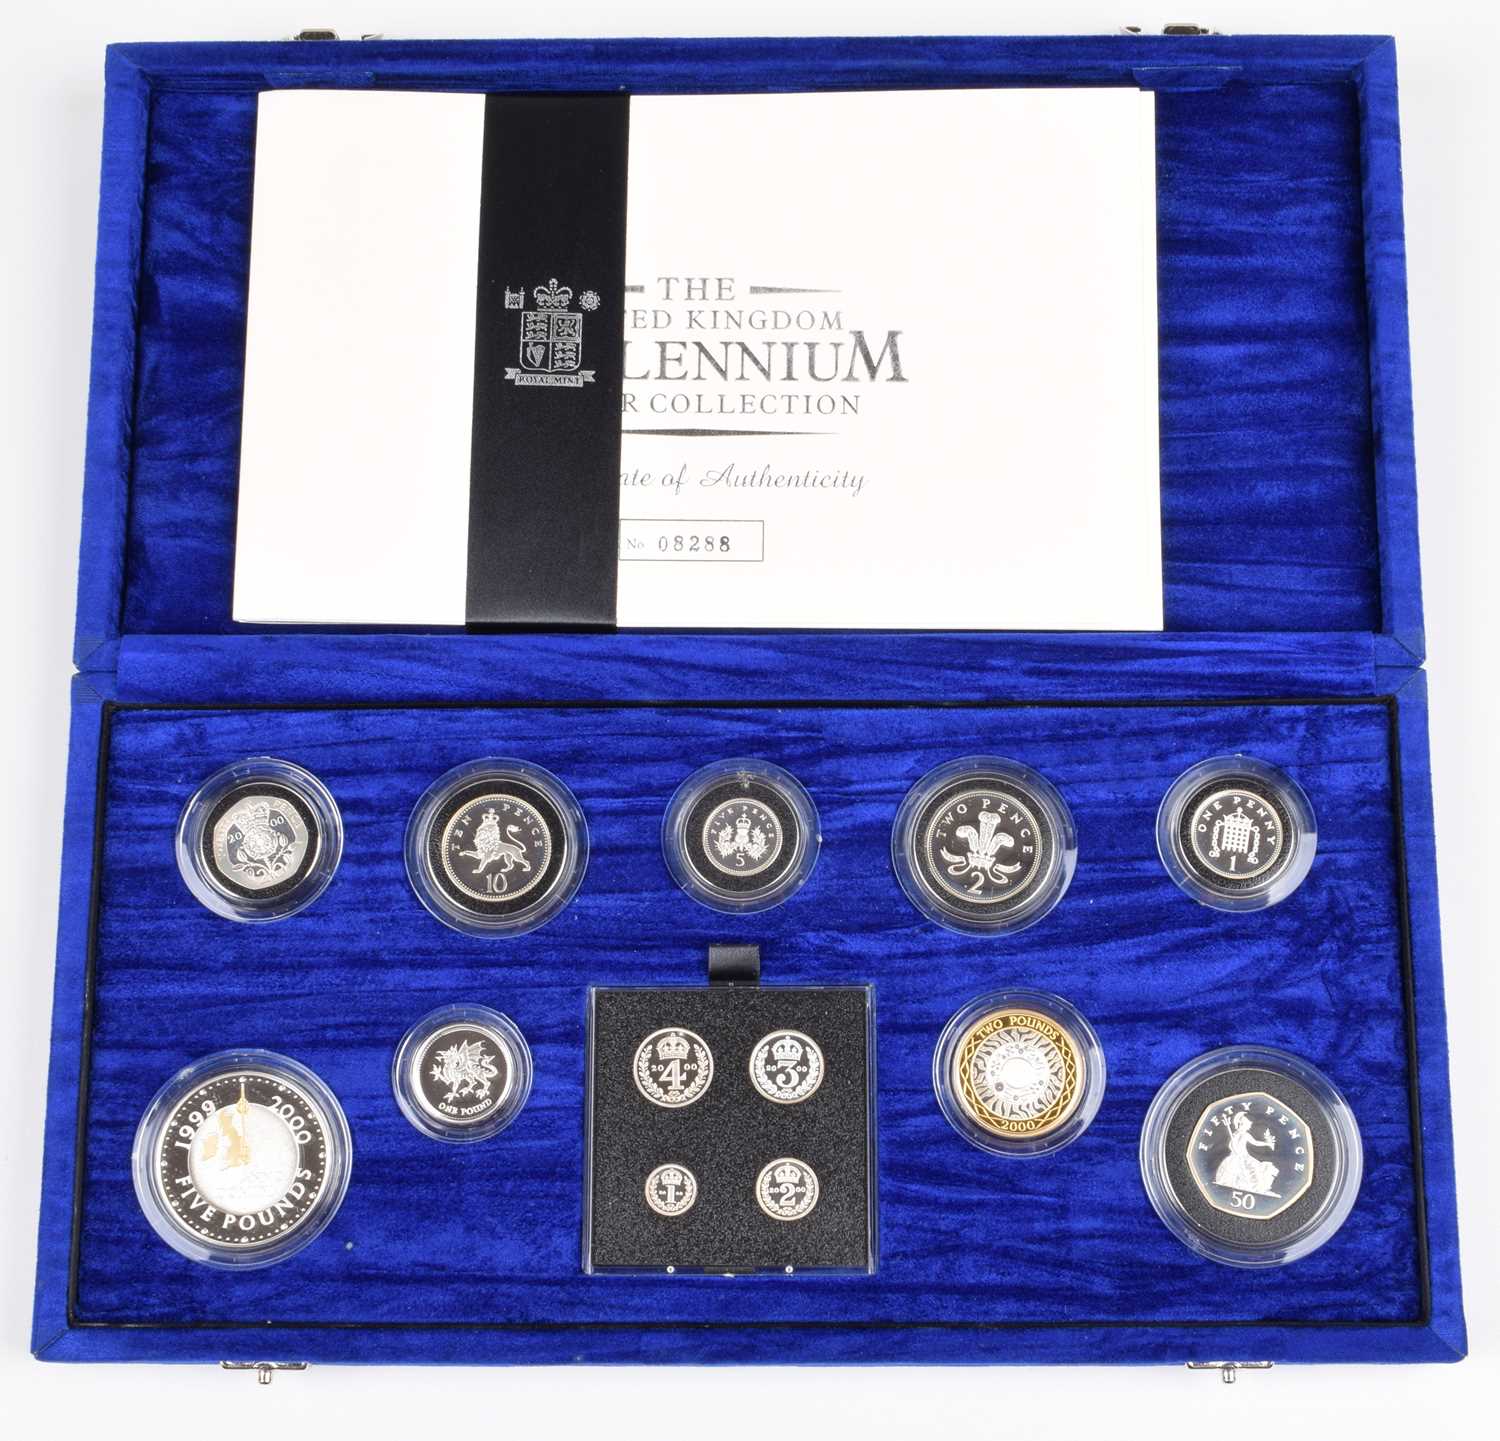 Lot 50 - The Royal Mint United Kingdom Millennium Silver Collection.